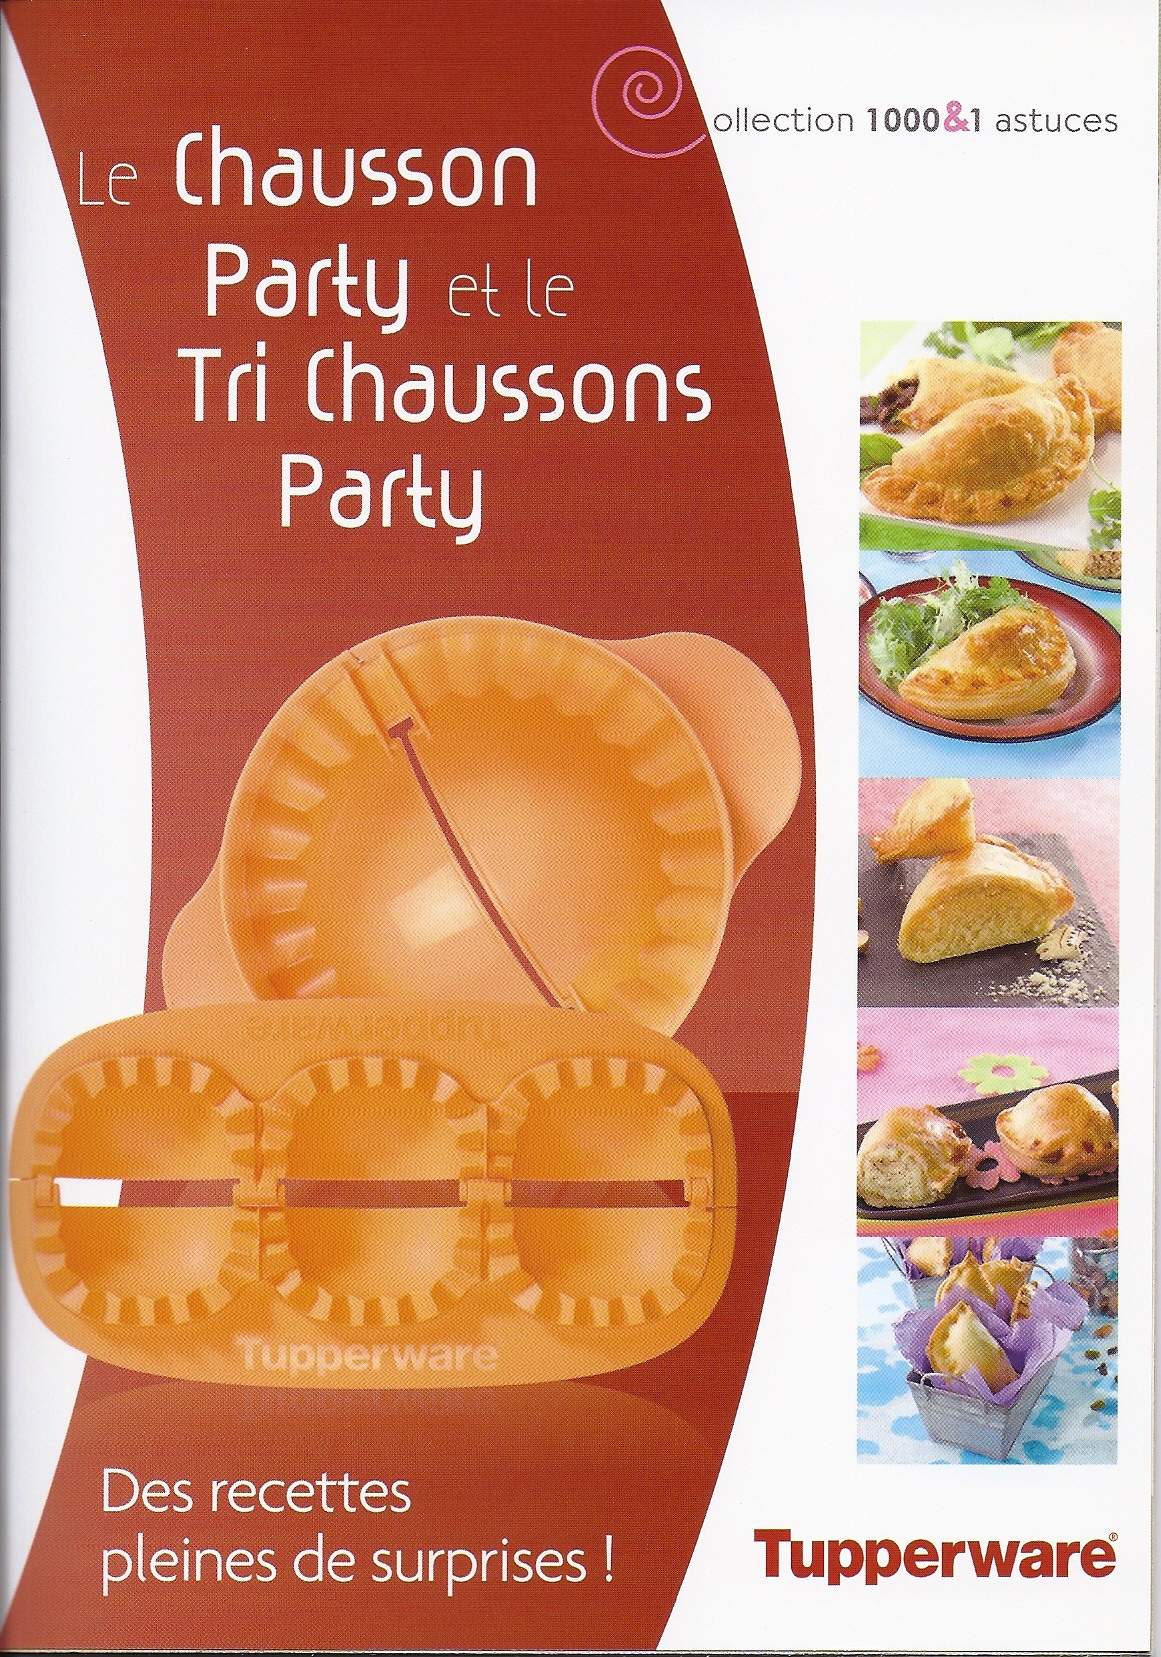 Chausson - Tri chaussons party - isabelle-tupperware.16